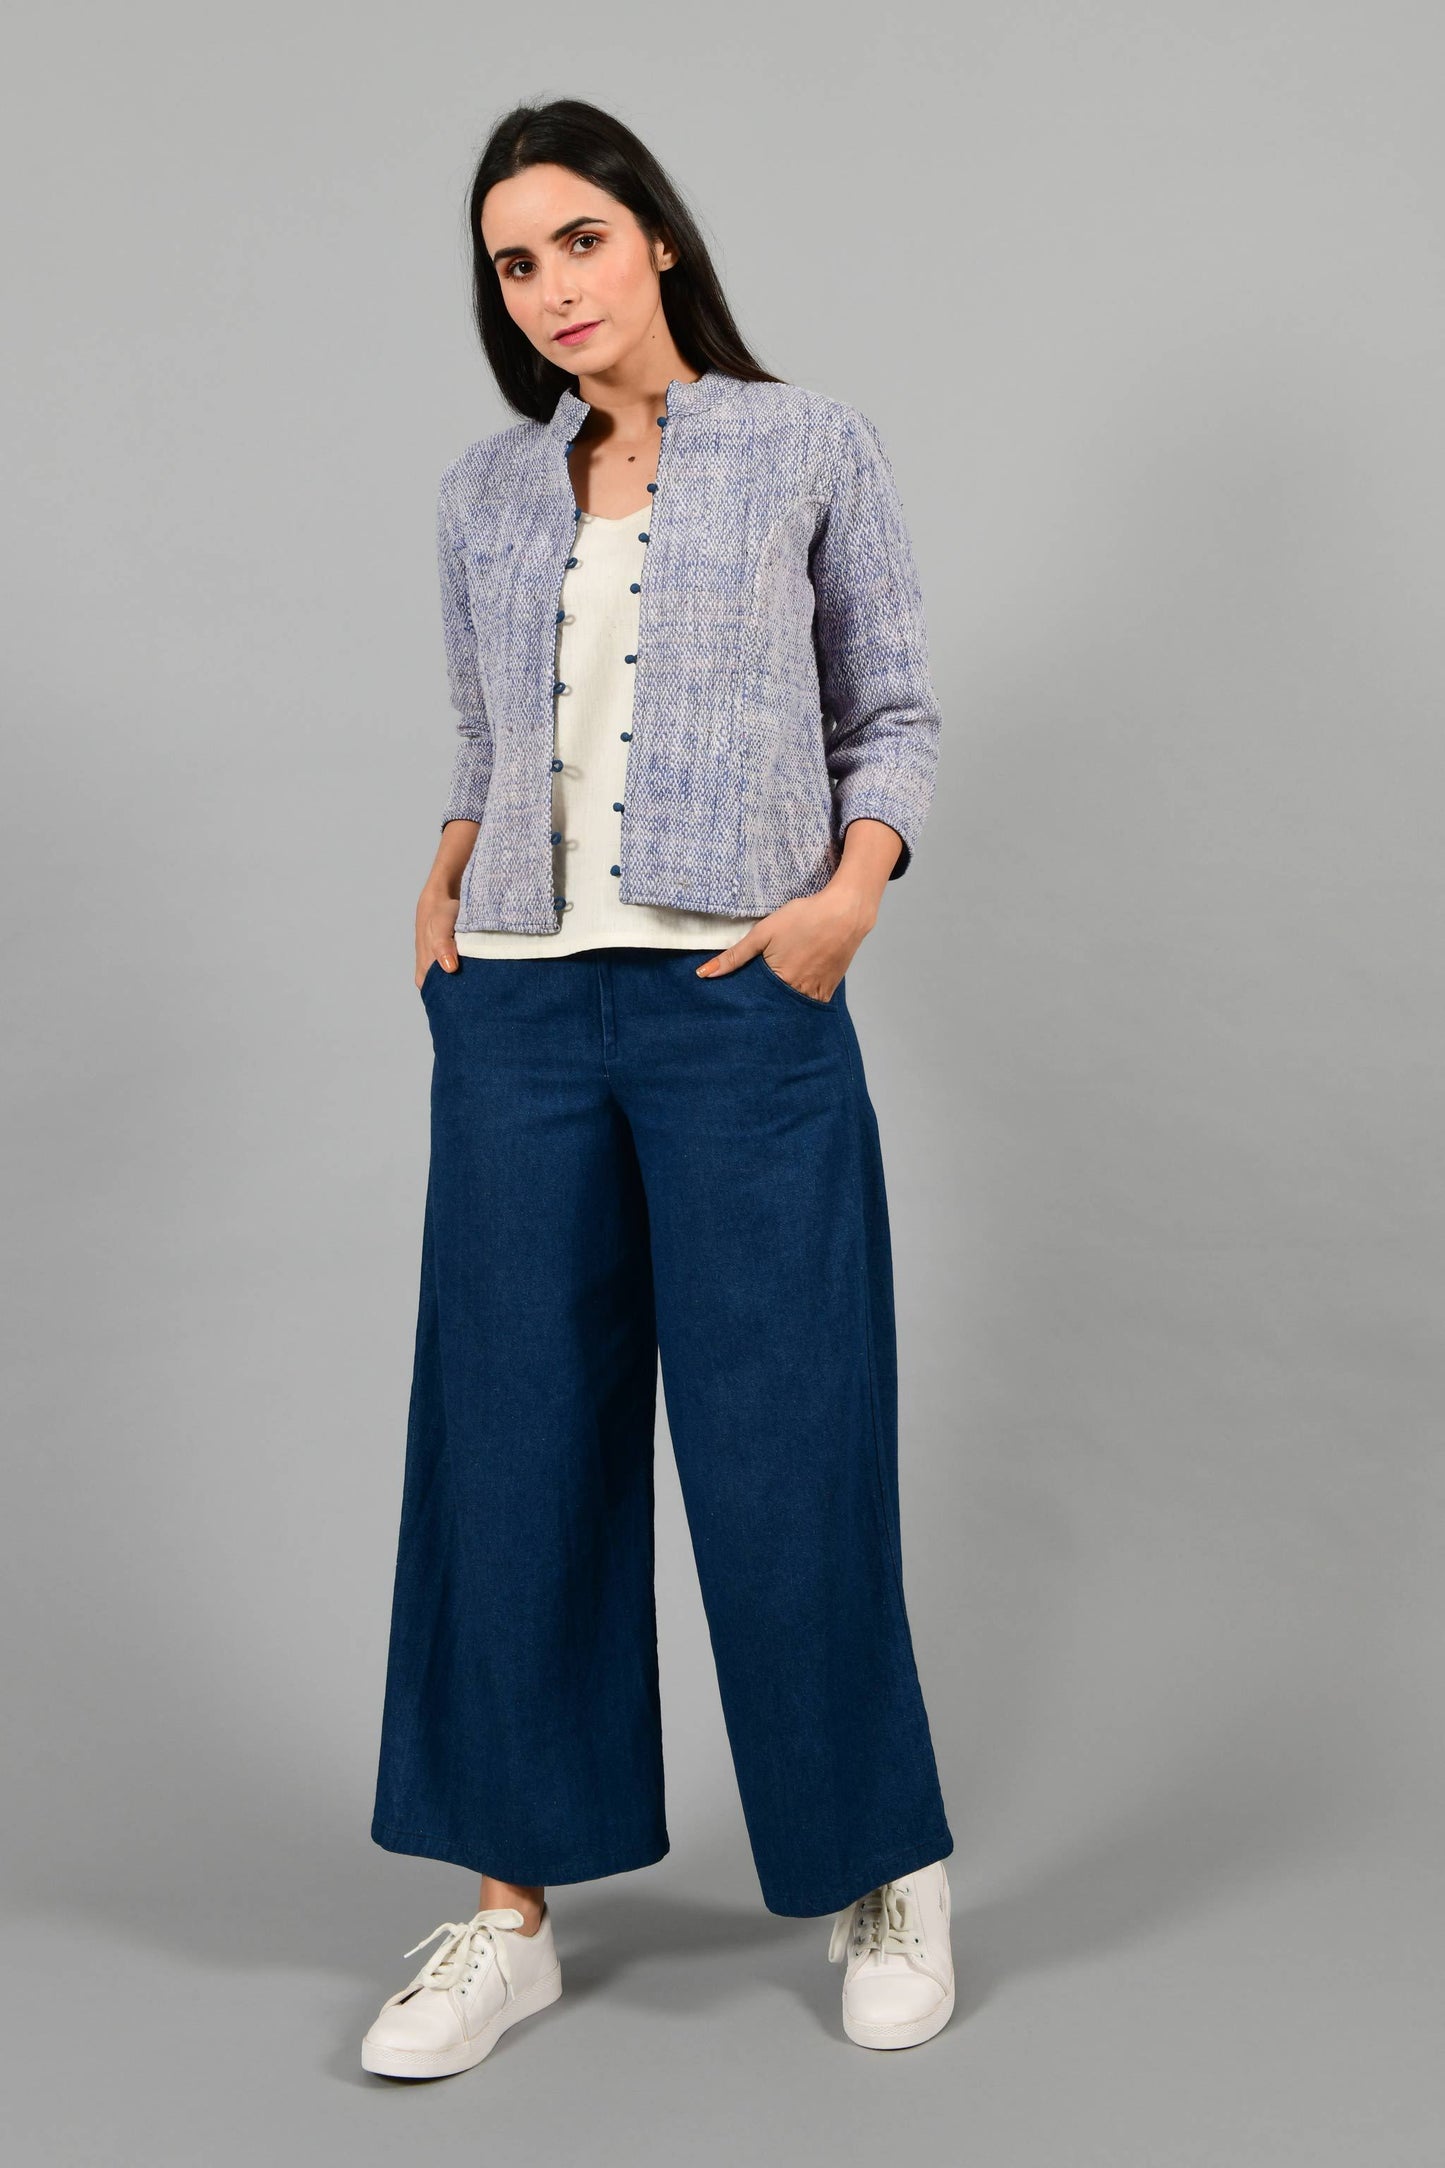 Front pose of an Indian Womenswear female model wearing Indigo Blue Gandhi Charkha spun and handwoven khadi buttoned mandarin collar Jacket over an off-white spaghetti and indigo palazzos by Cotton Rack.